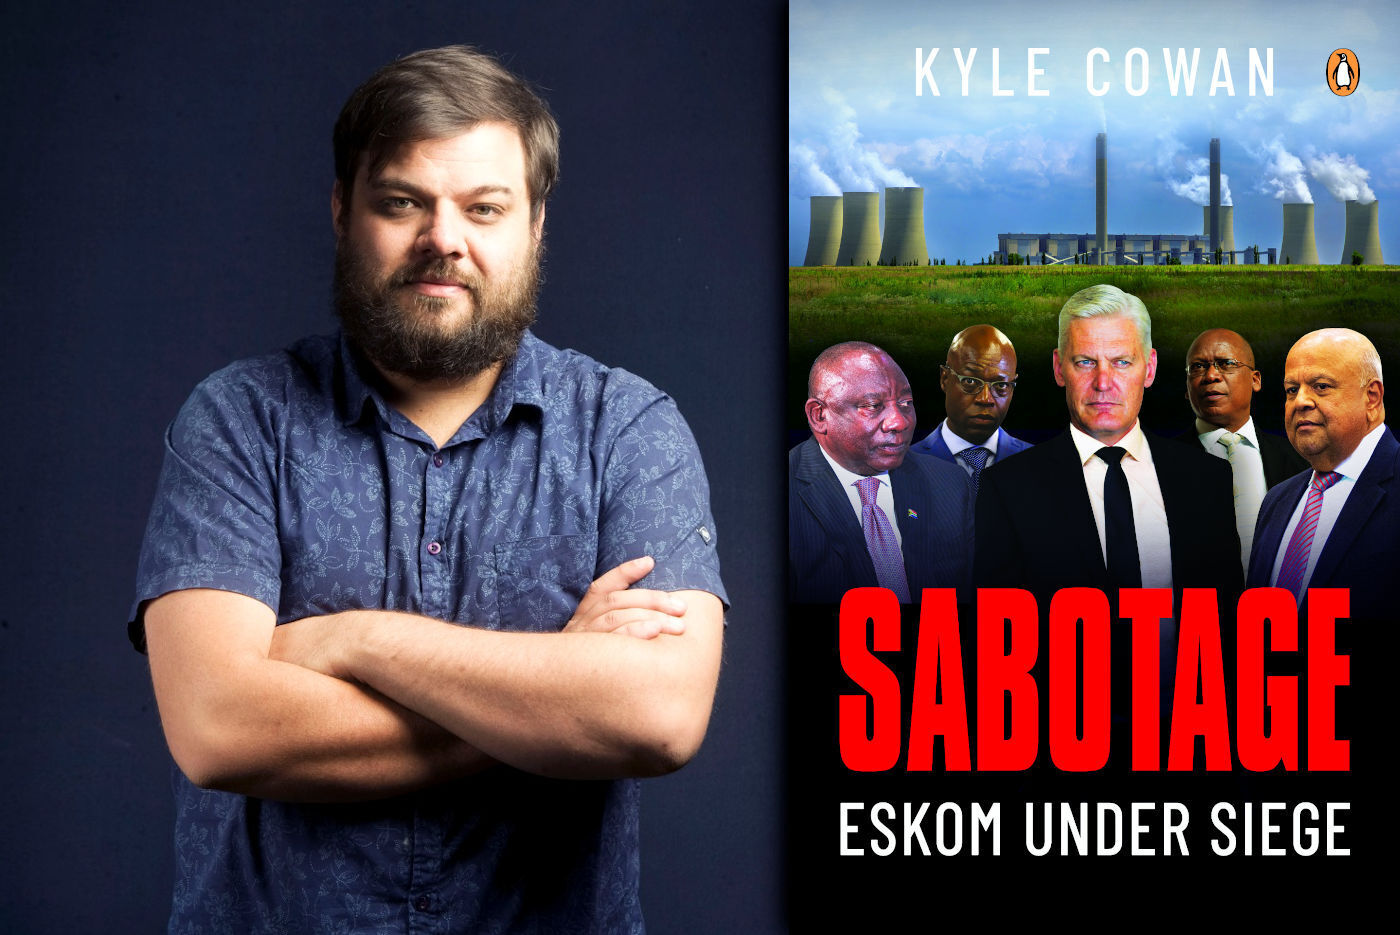 Author Kyle Cowan (left) and the cover of his book 'Sabotage' (right).